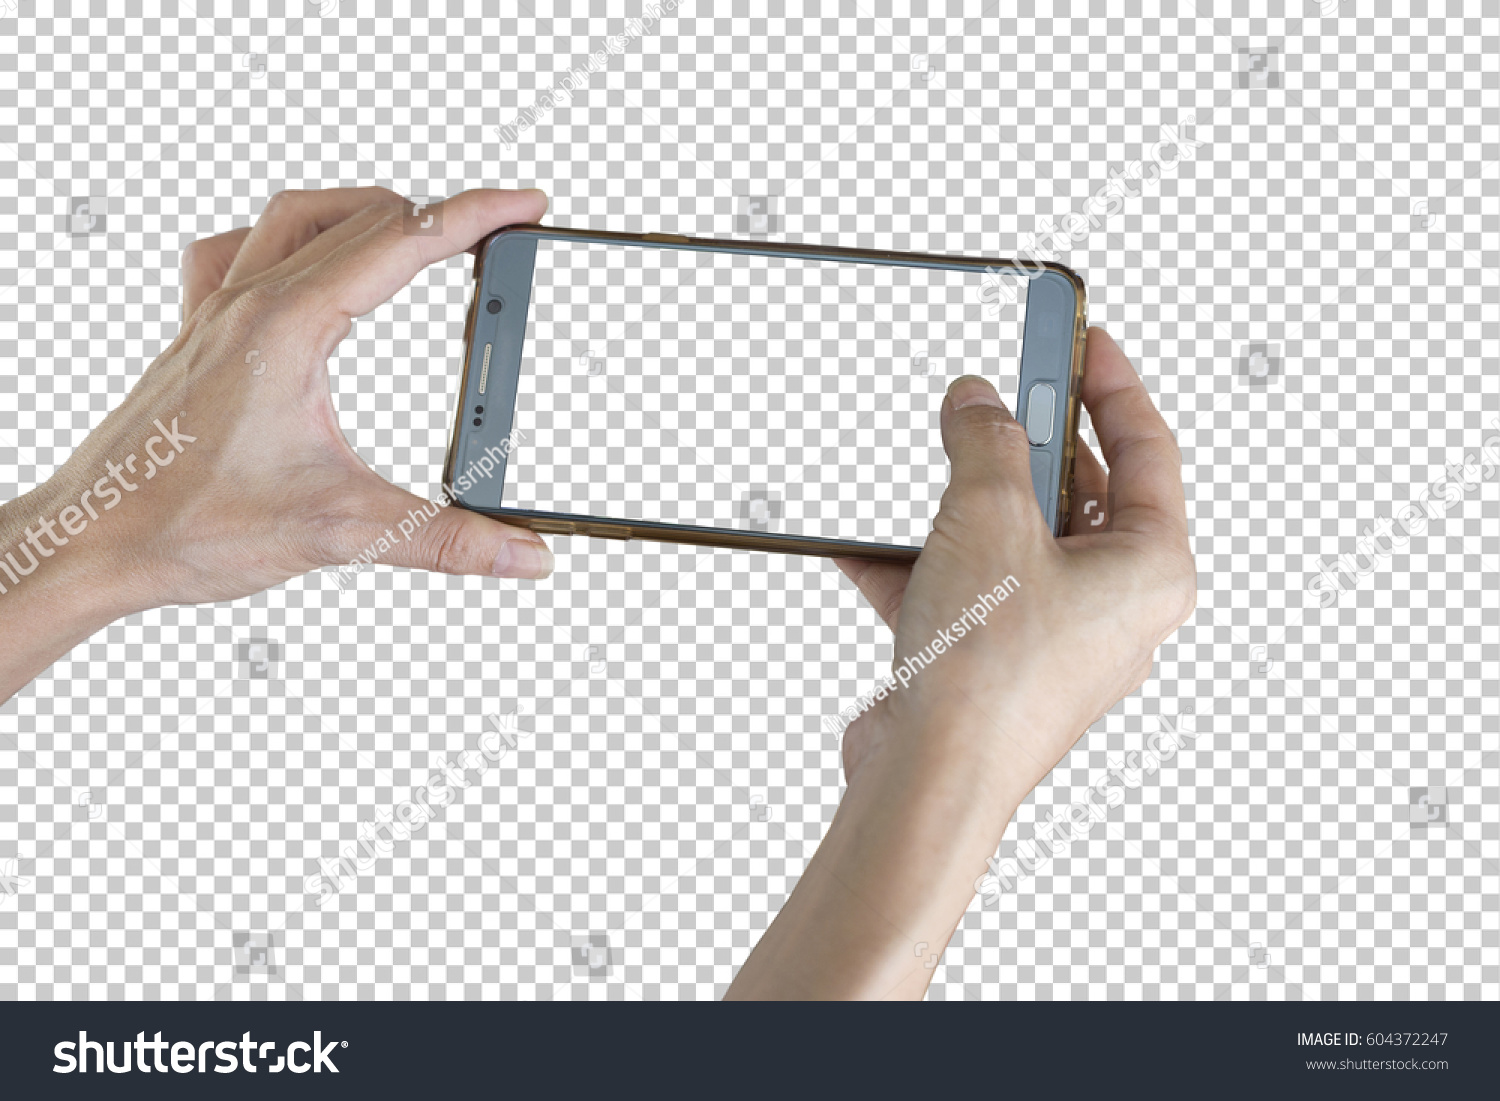 Taking photo with mobile smart phone isolated on transparent background with clipping path for the screen. #604372247